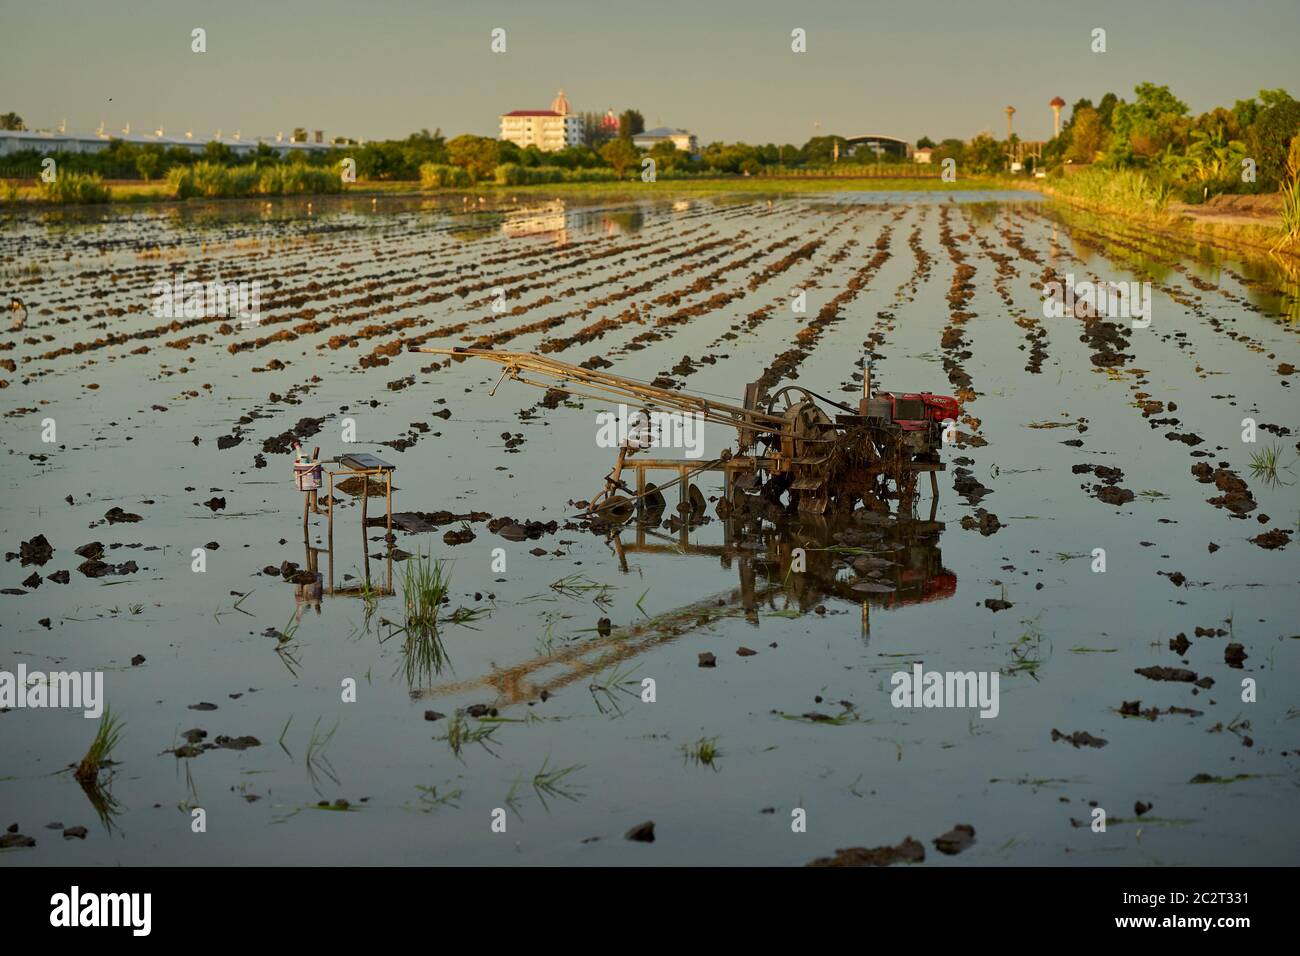 Ploughing machine at rest in a water filled paddy field. Stock Photo